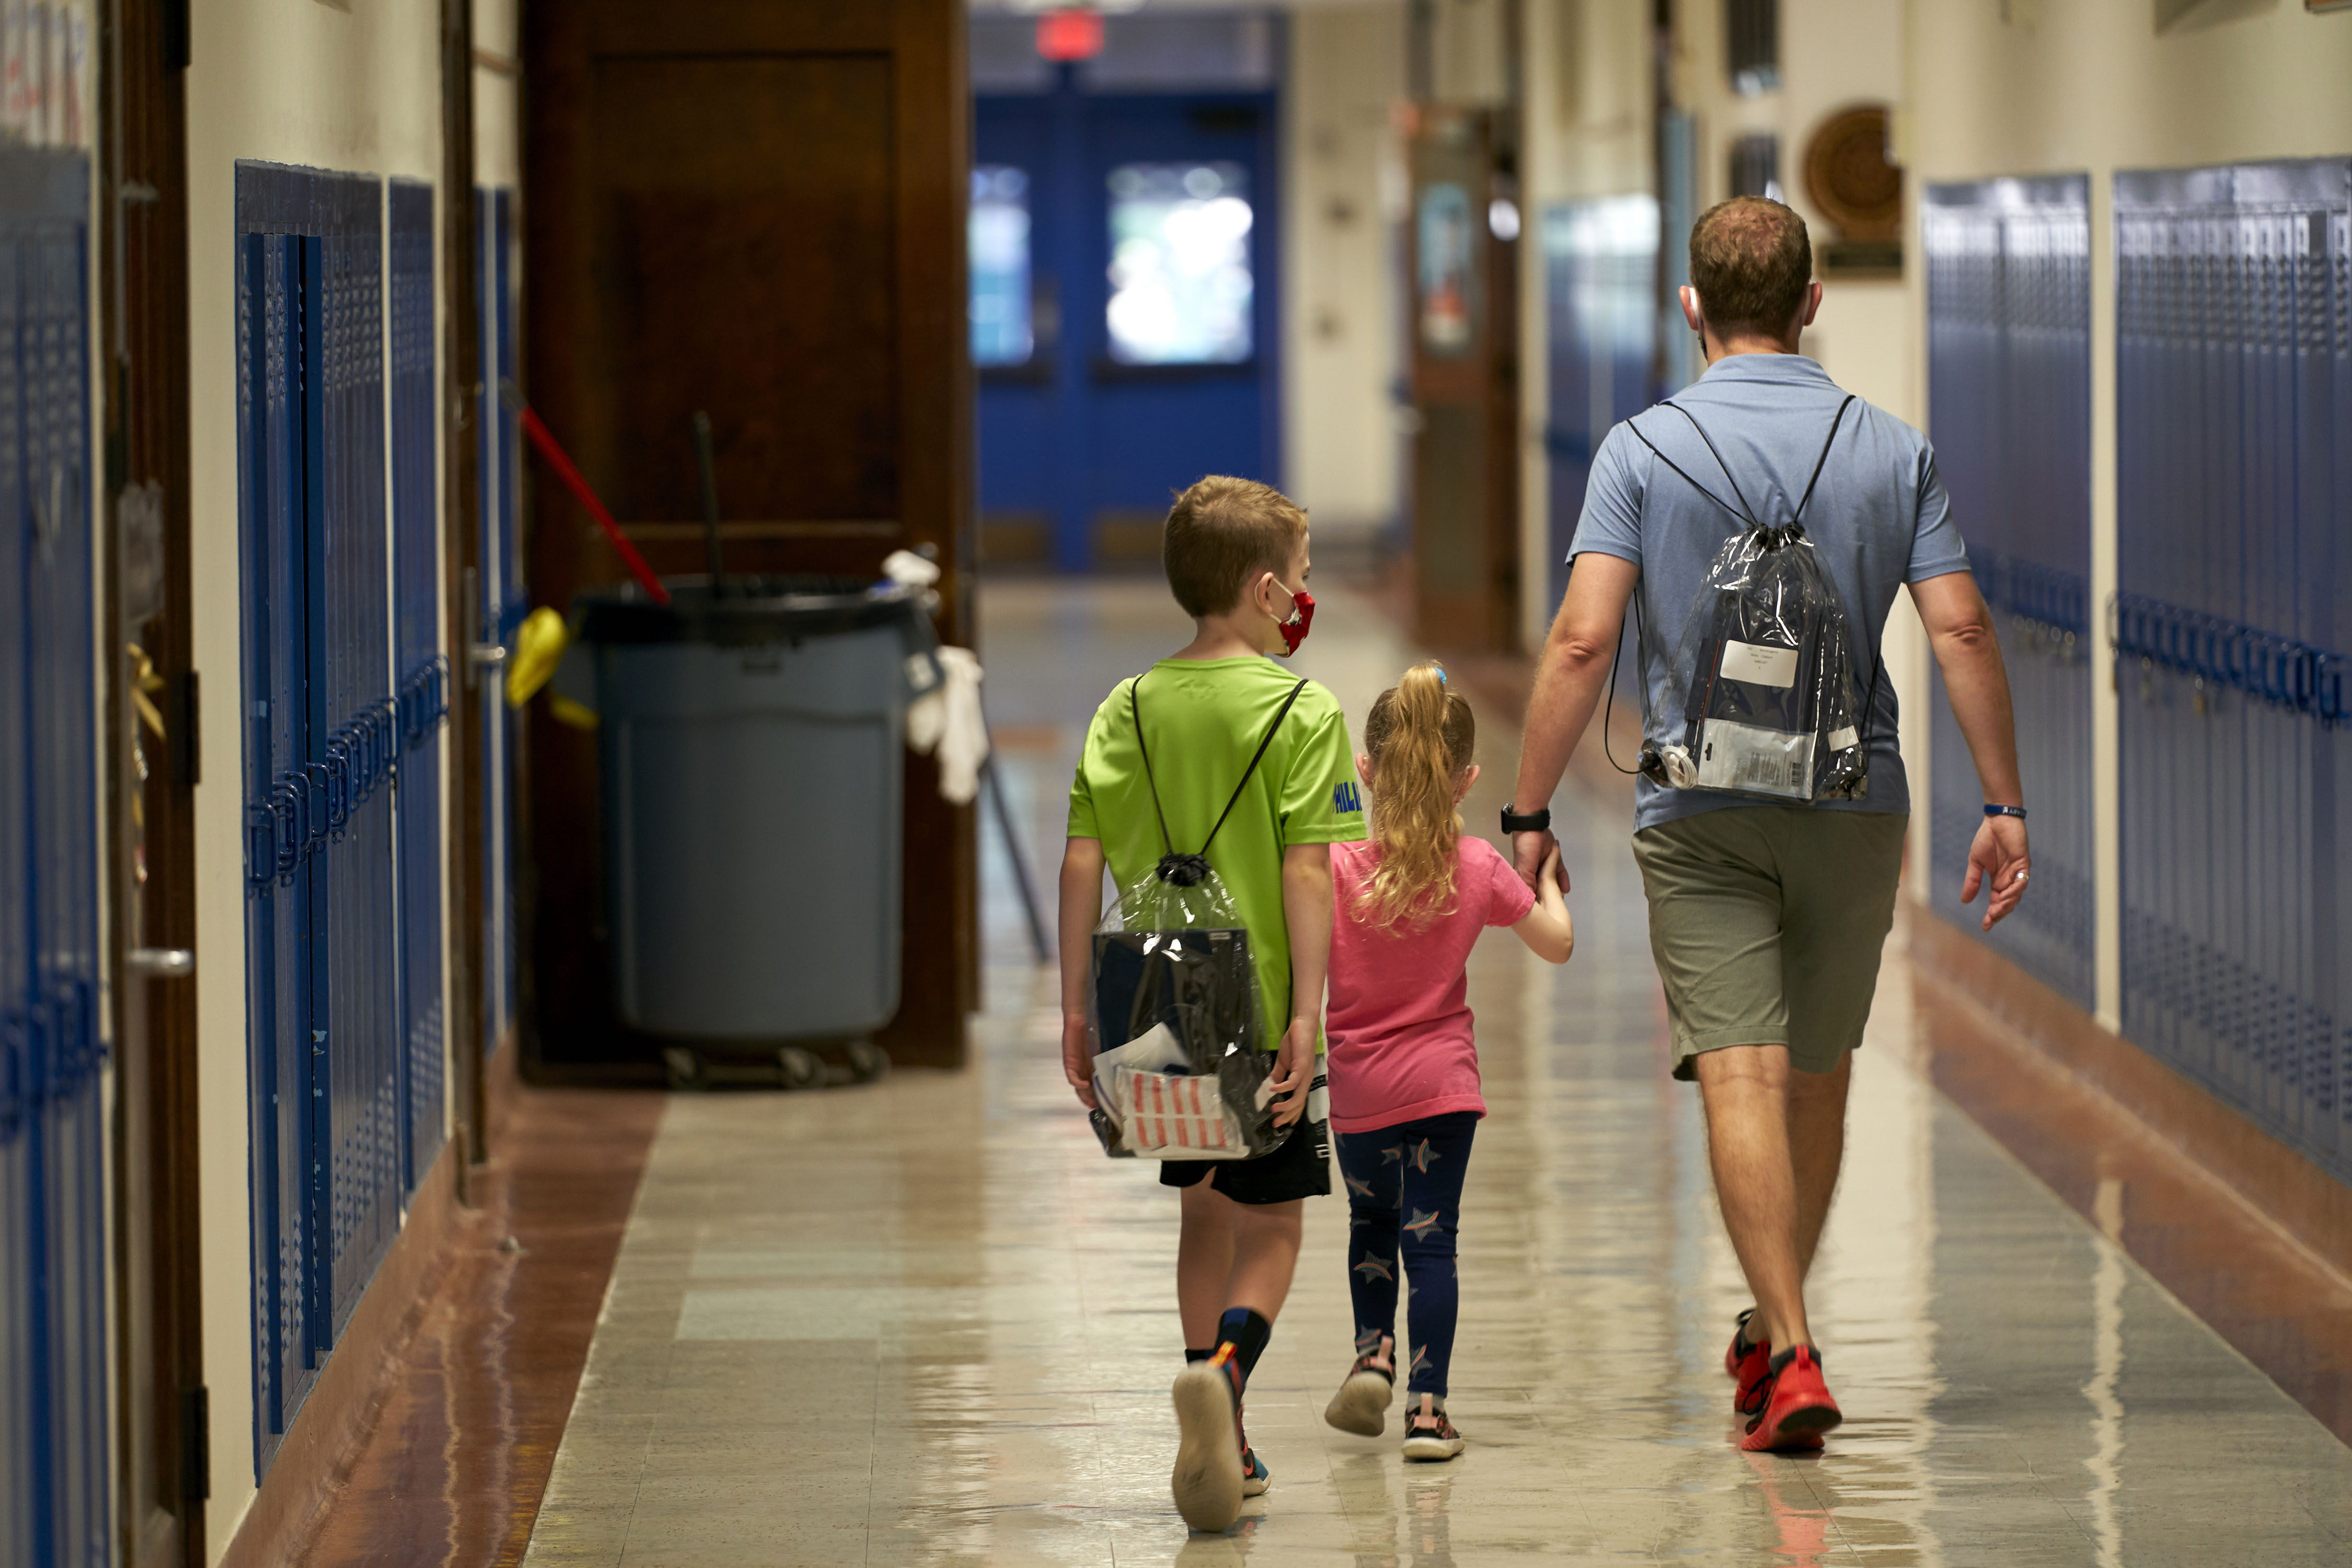 A student and parent wear backpacks carrying a Google Chromebook laptop and an Apple iPad for remote learning during a technology deployment event at Mockingbird Elementary School in Dallas on August 19.